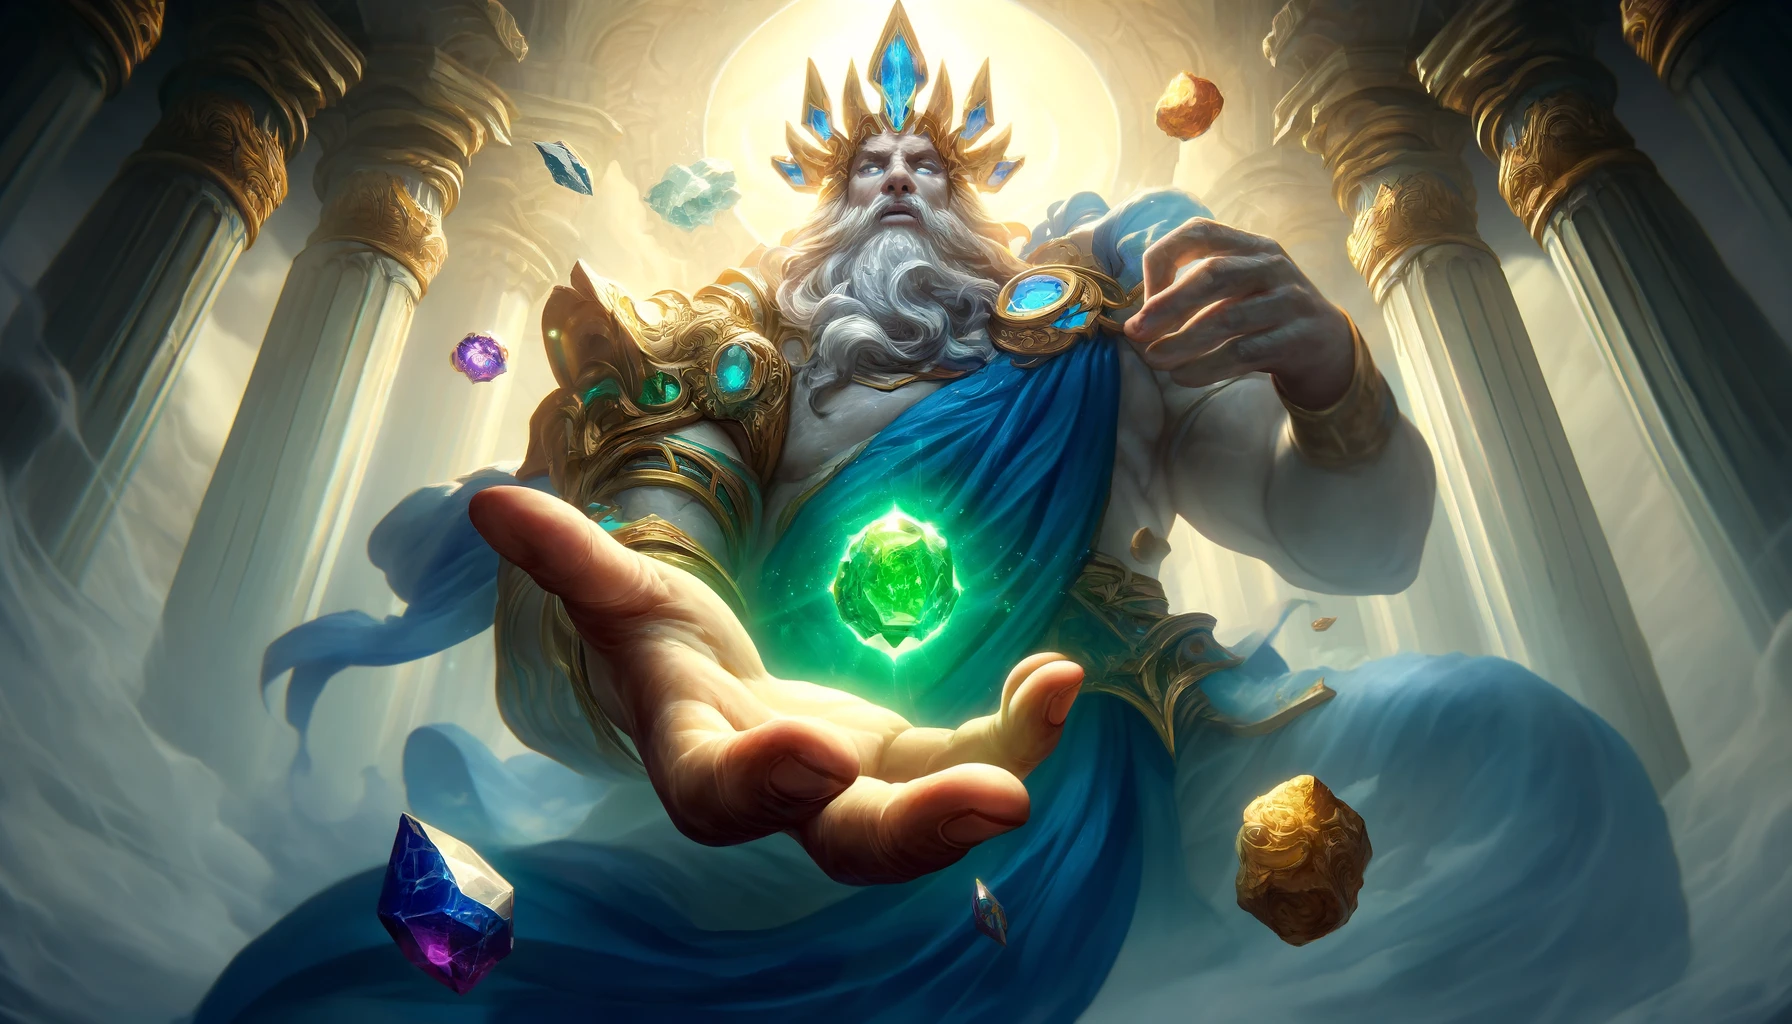 The regal giant Thanos holds the green time stone floating above her in his palm.